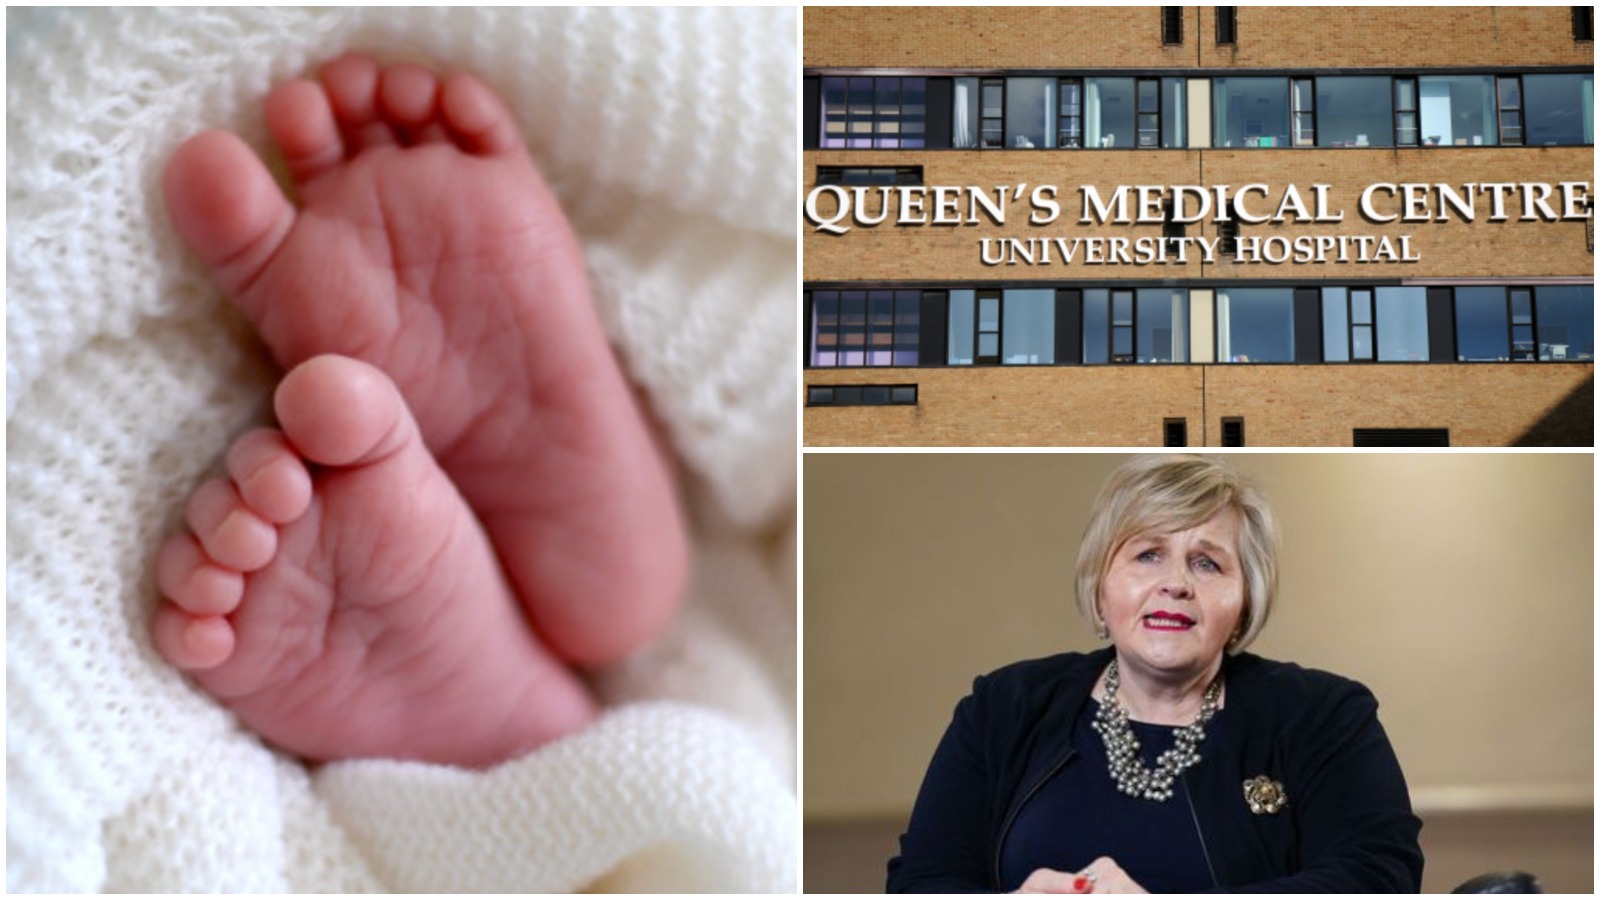 More Than 400 Families Contact Nottinghams Maternity Review In First